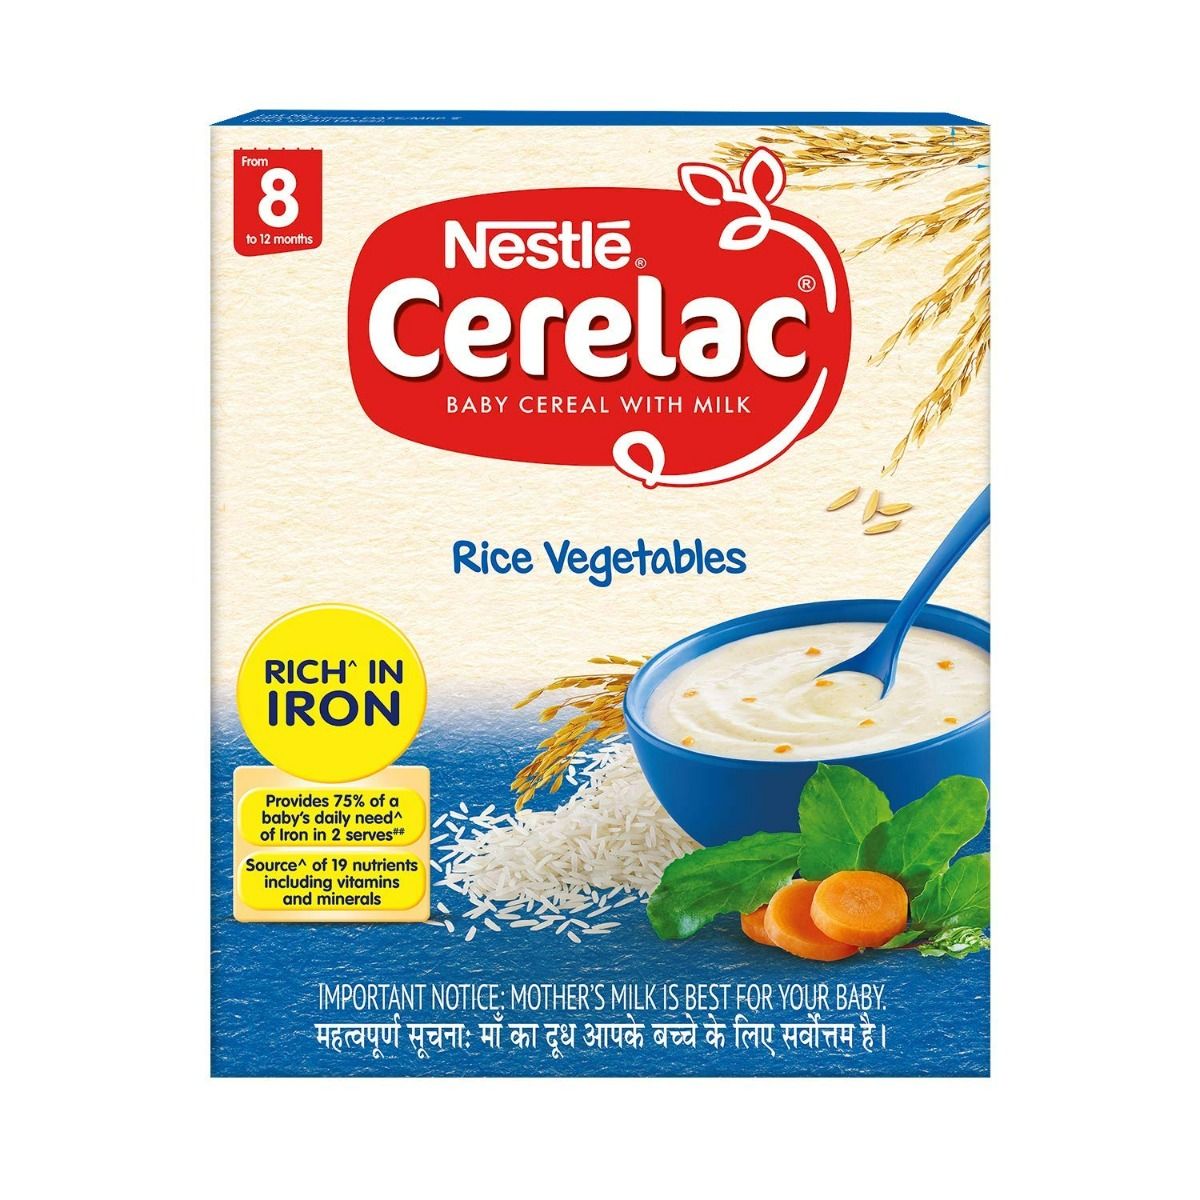 Buy Nestle Cerelac Rice Vegetables Baby Cereal, 8 to 12 Months, 300 gm Refill Pack Online